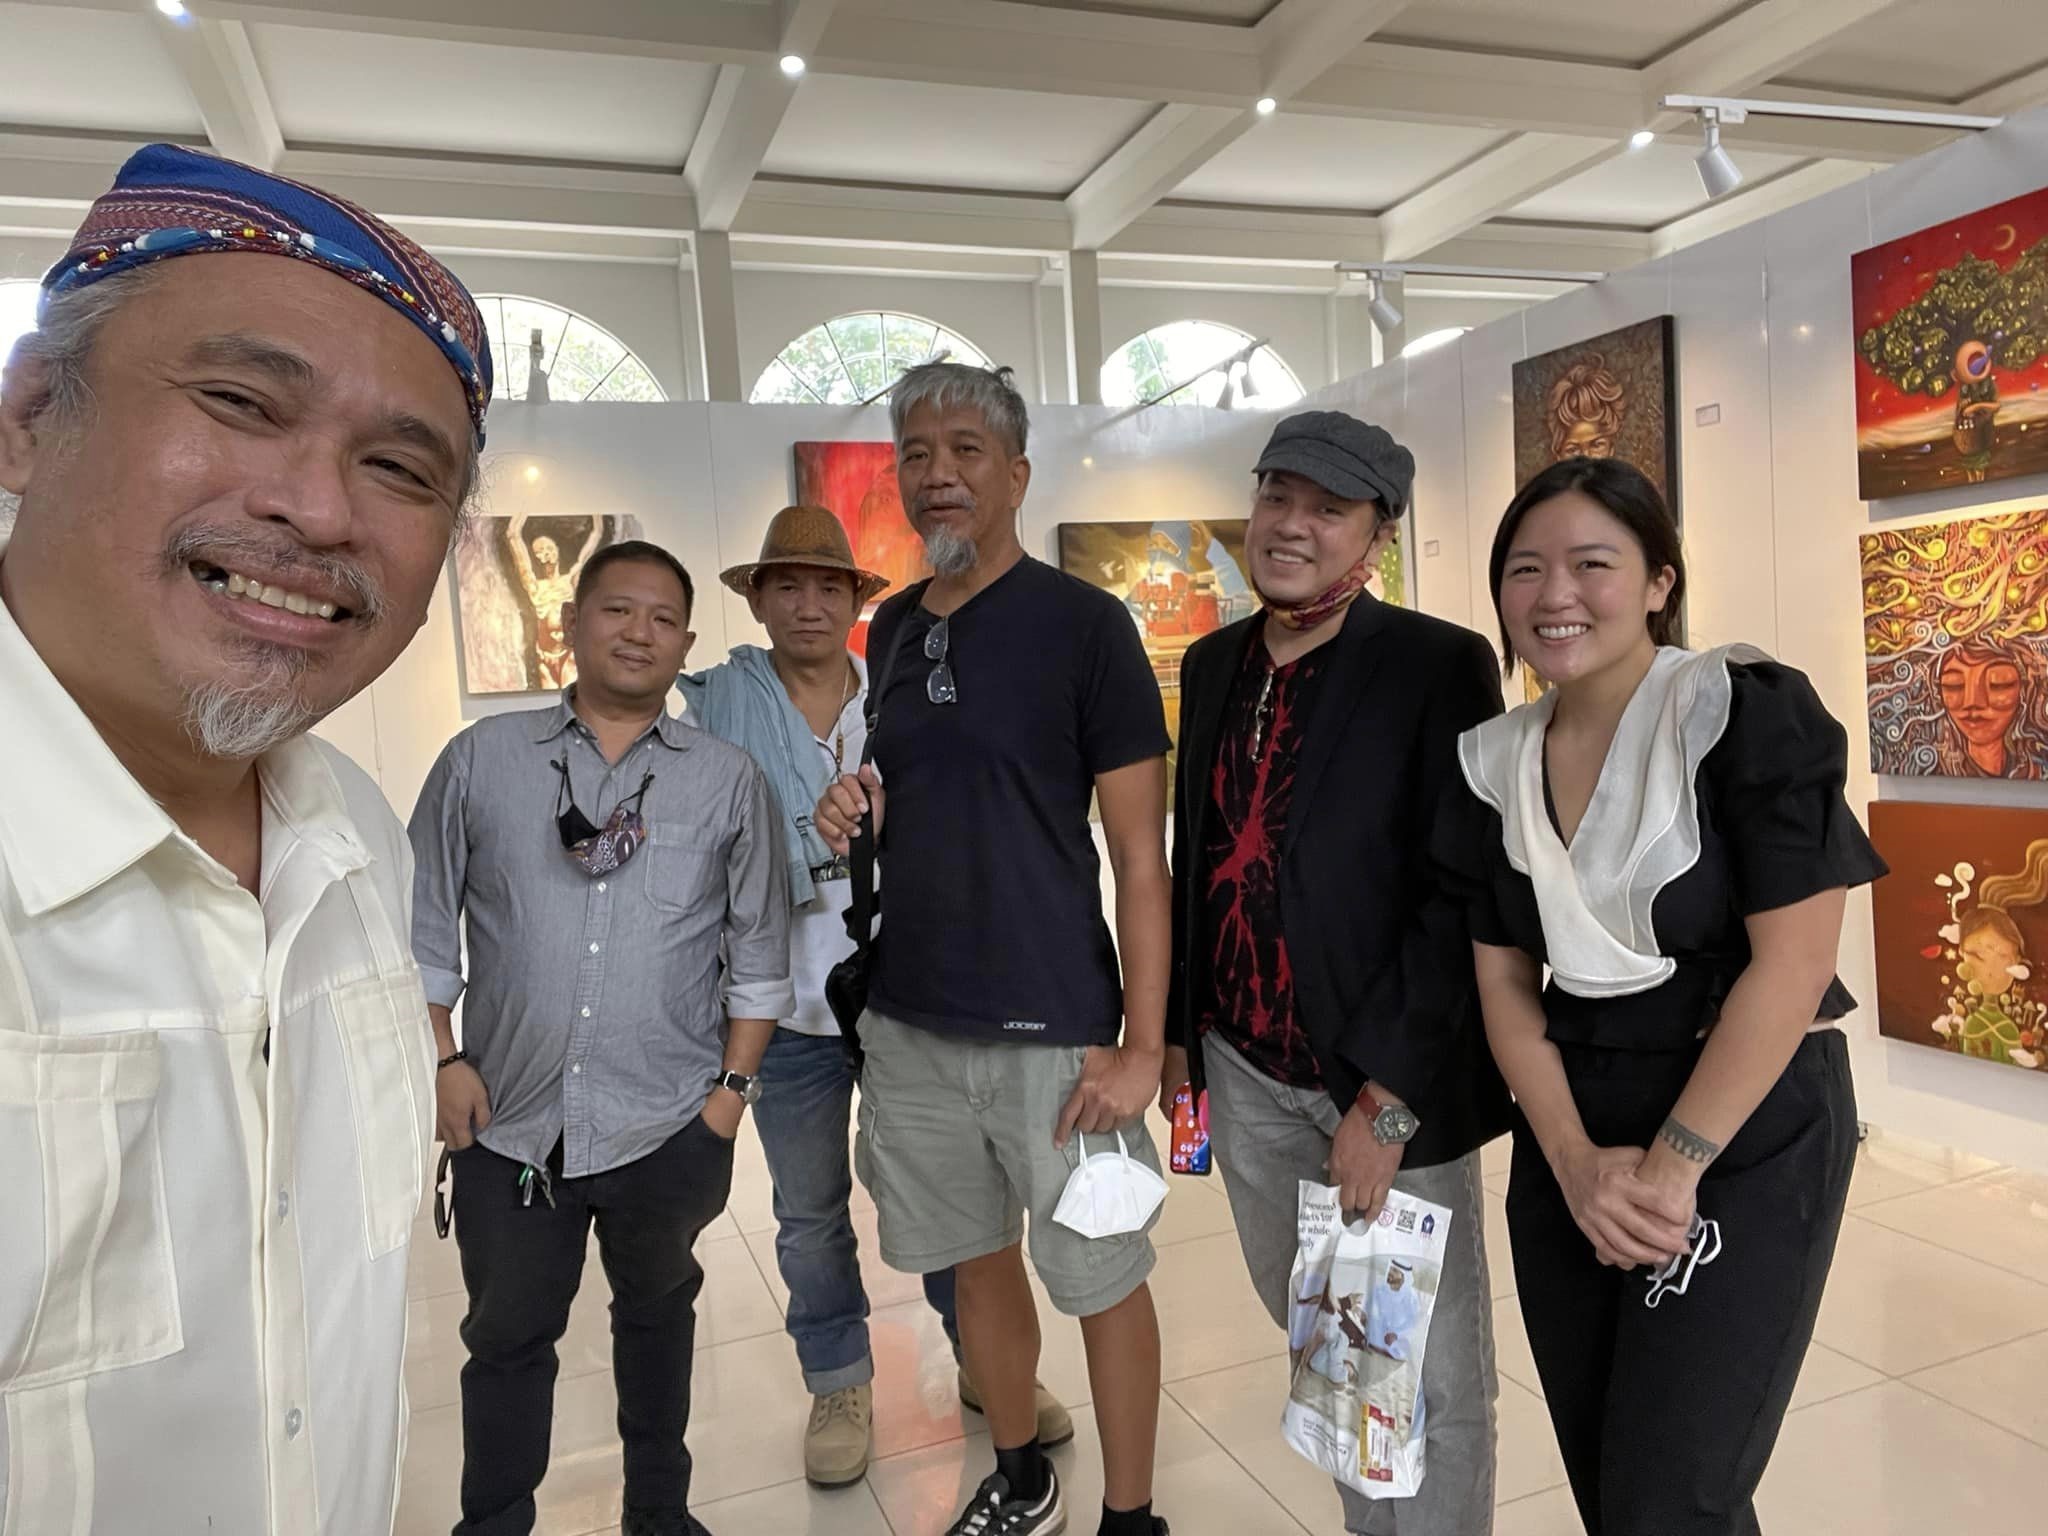 Tarlac Hosts 1st CL Art Fair - Provincial Government of Tarlac